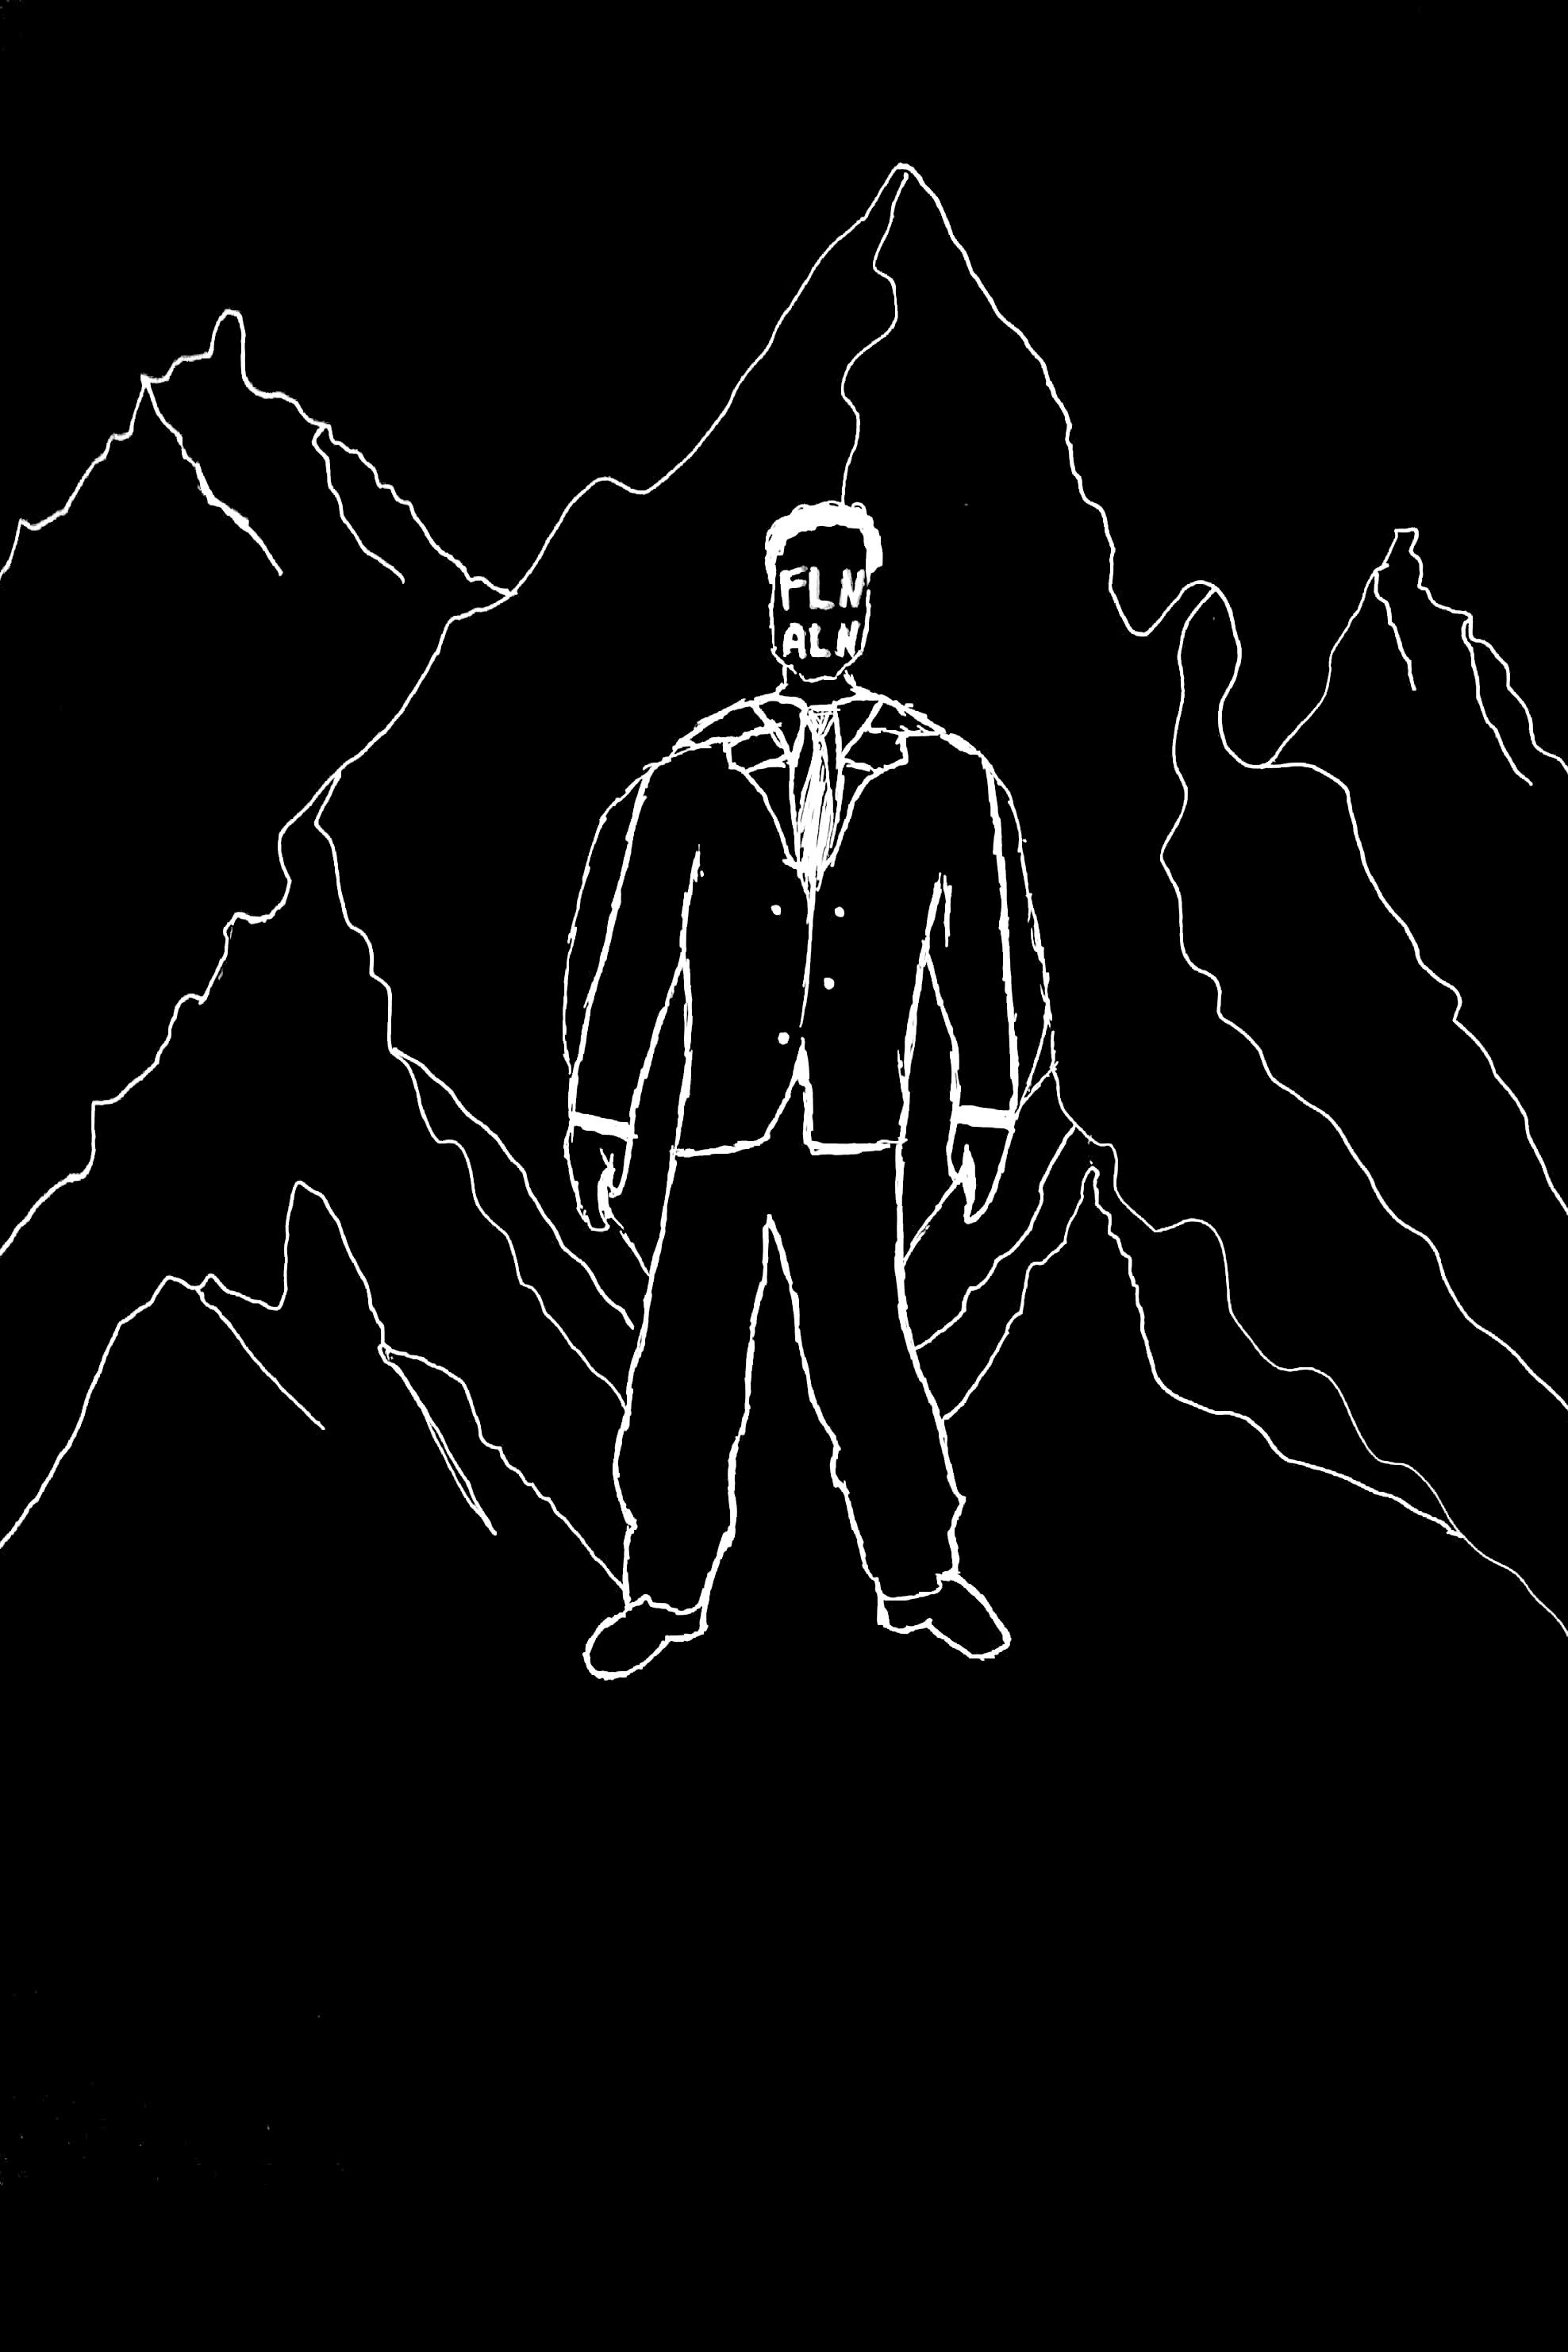 Black and white drawing of a man in front of mountains with FLN ALN written on his face. © Issam Larkat